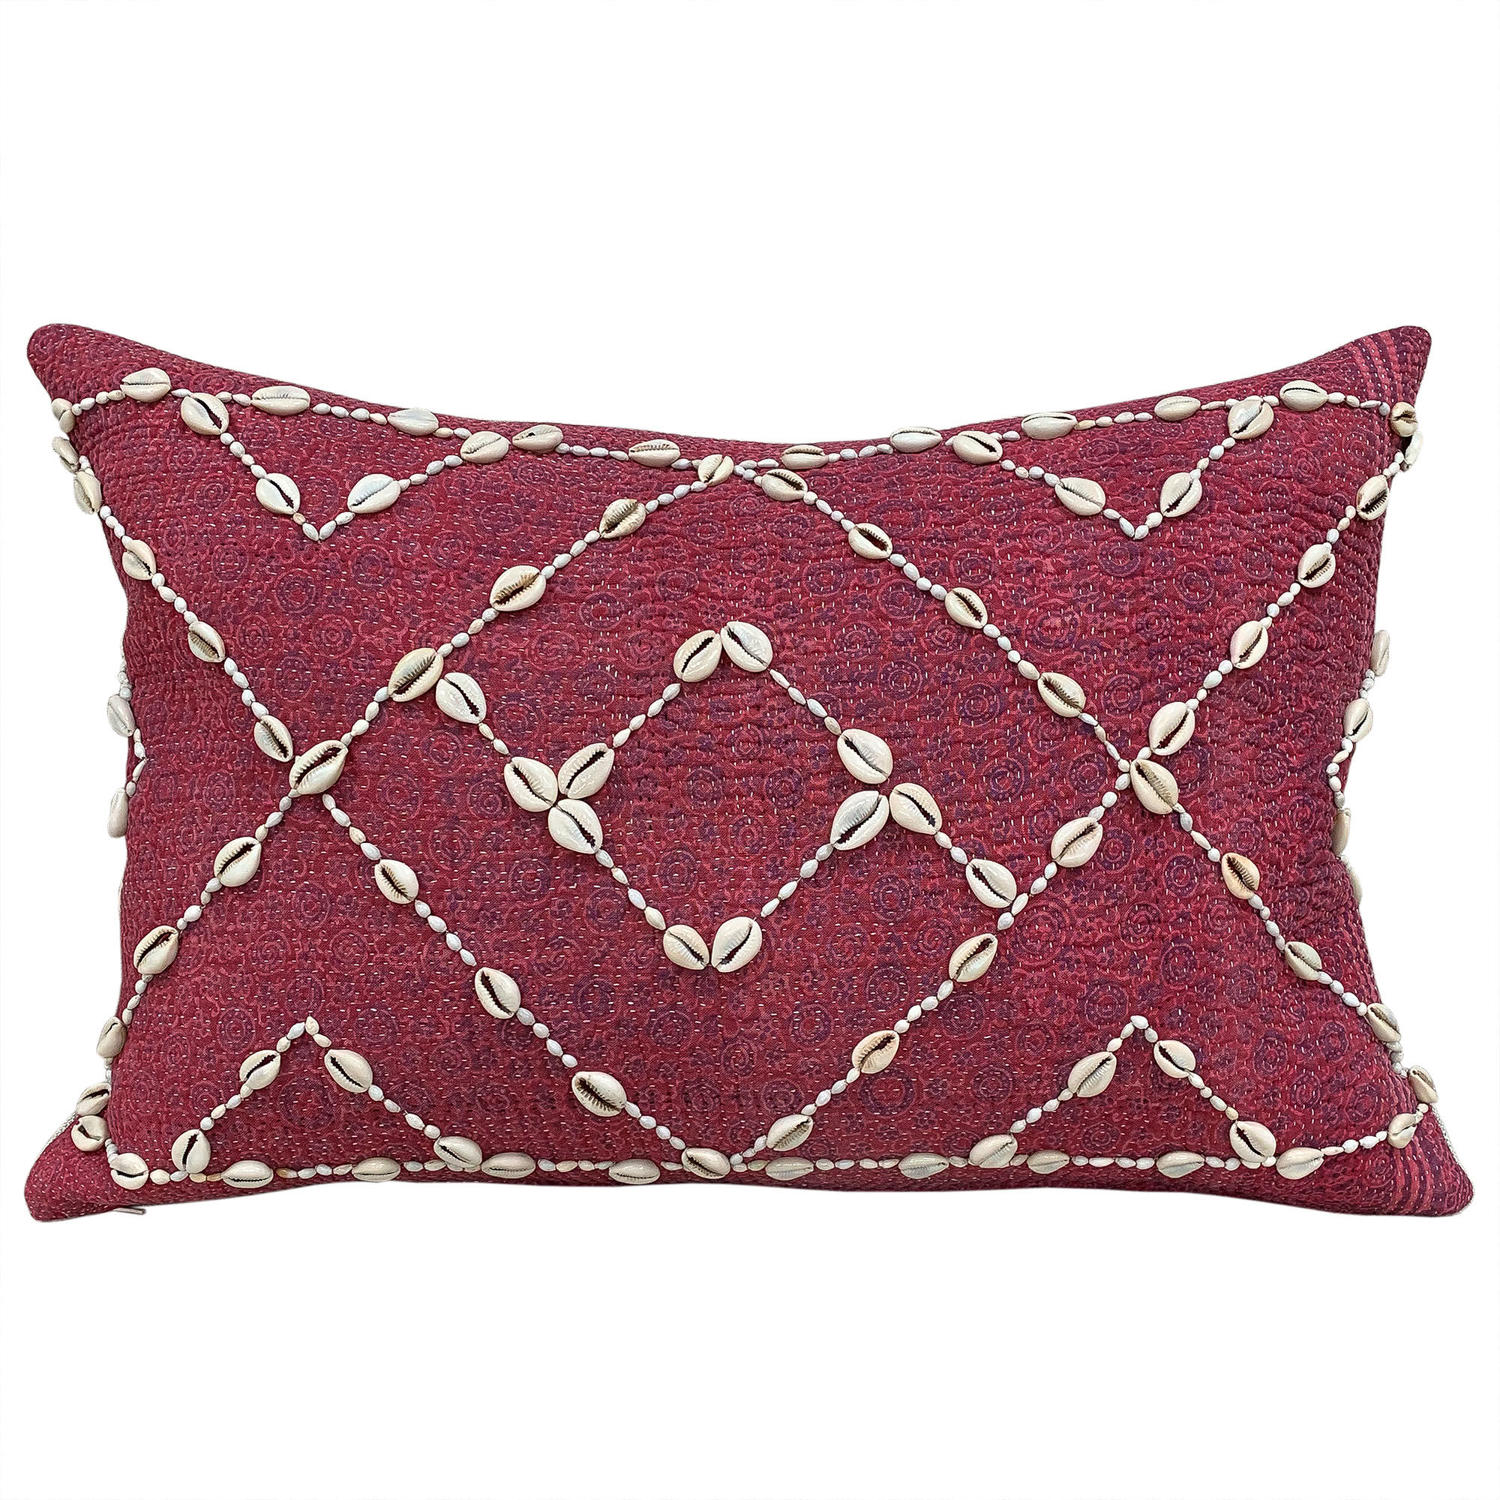 Sami Quilt Cushion with Shells and Seeds